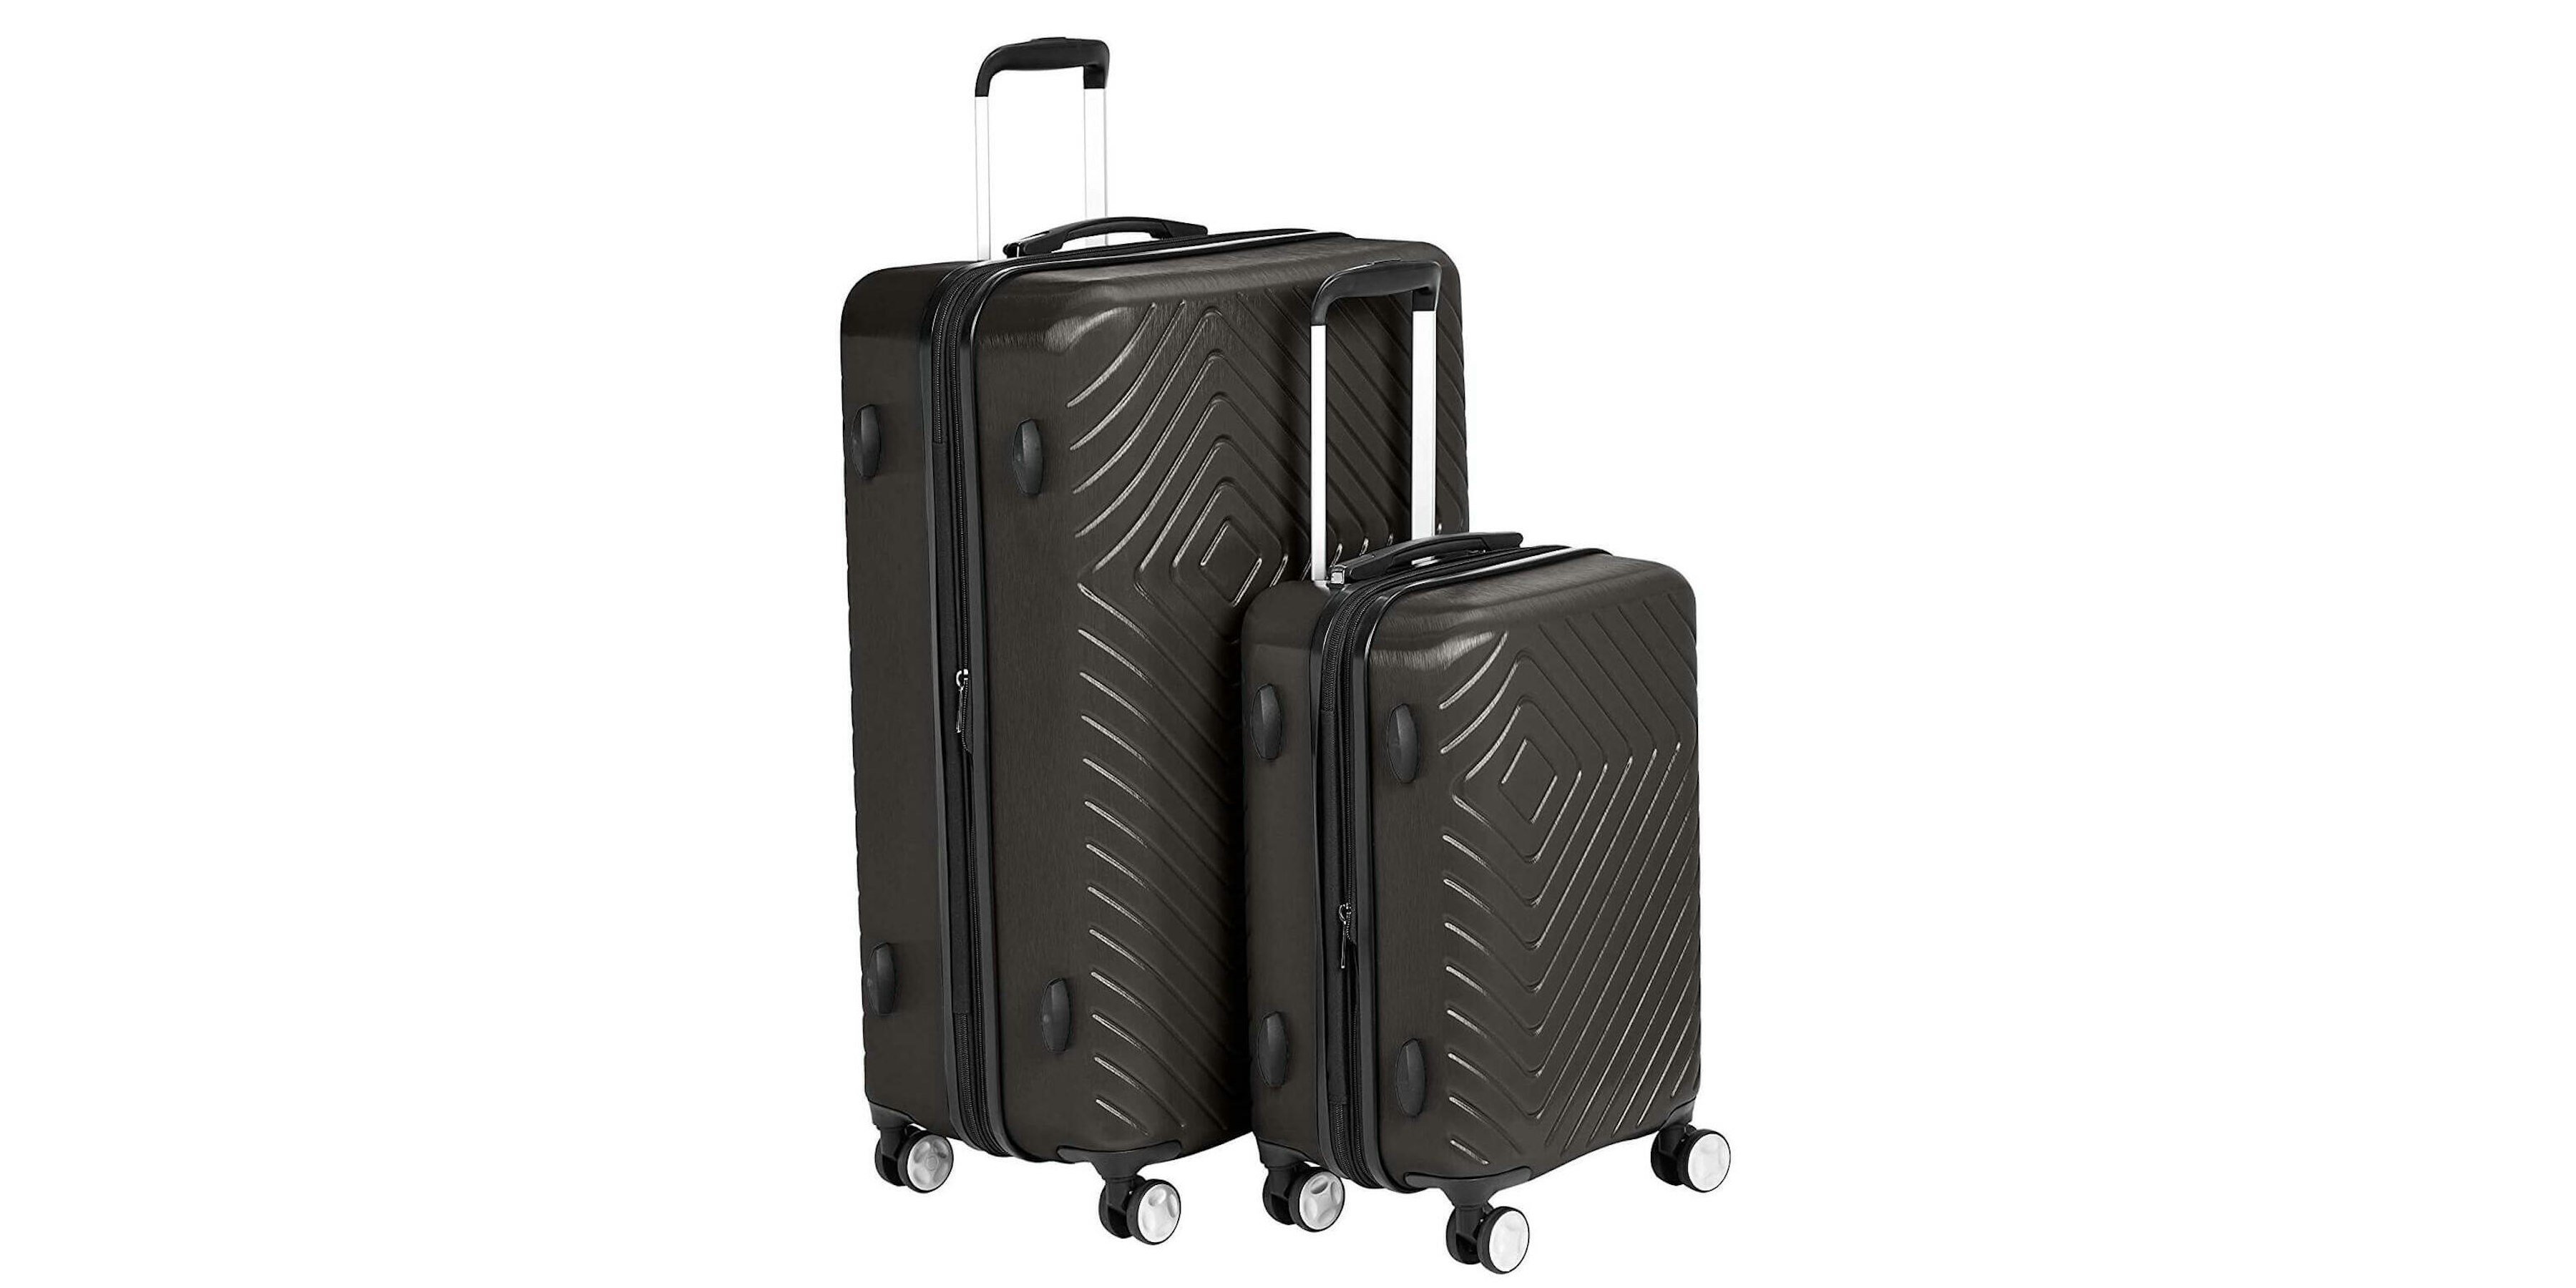 Best Luggage for Cruise Travel